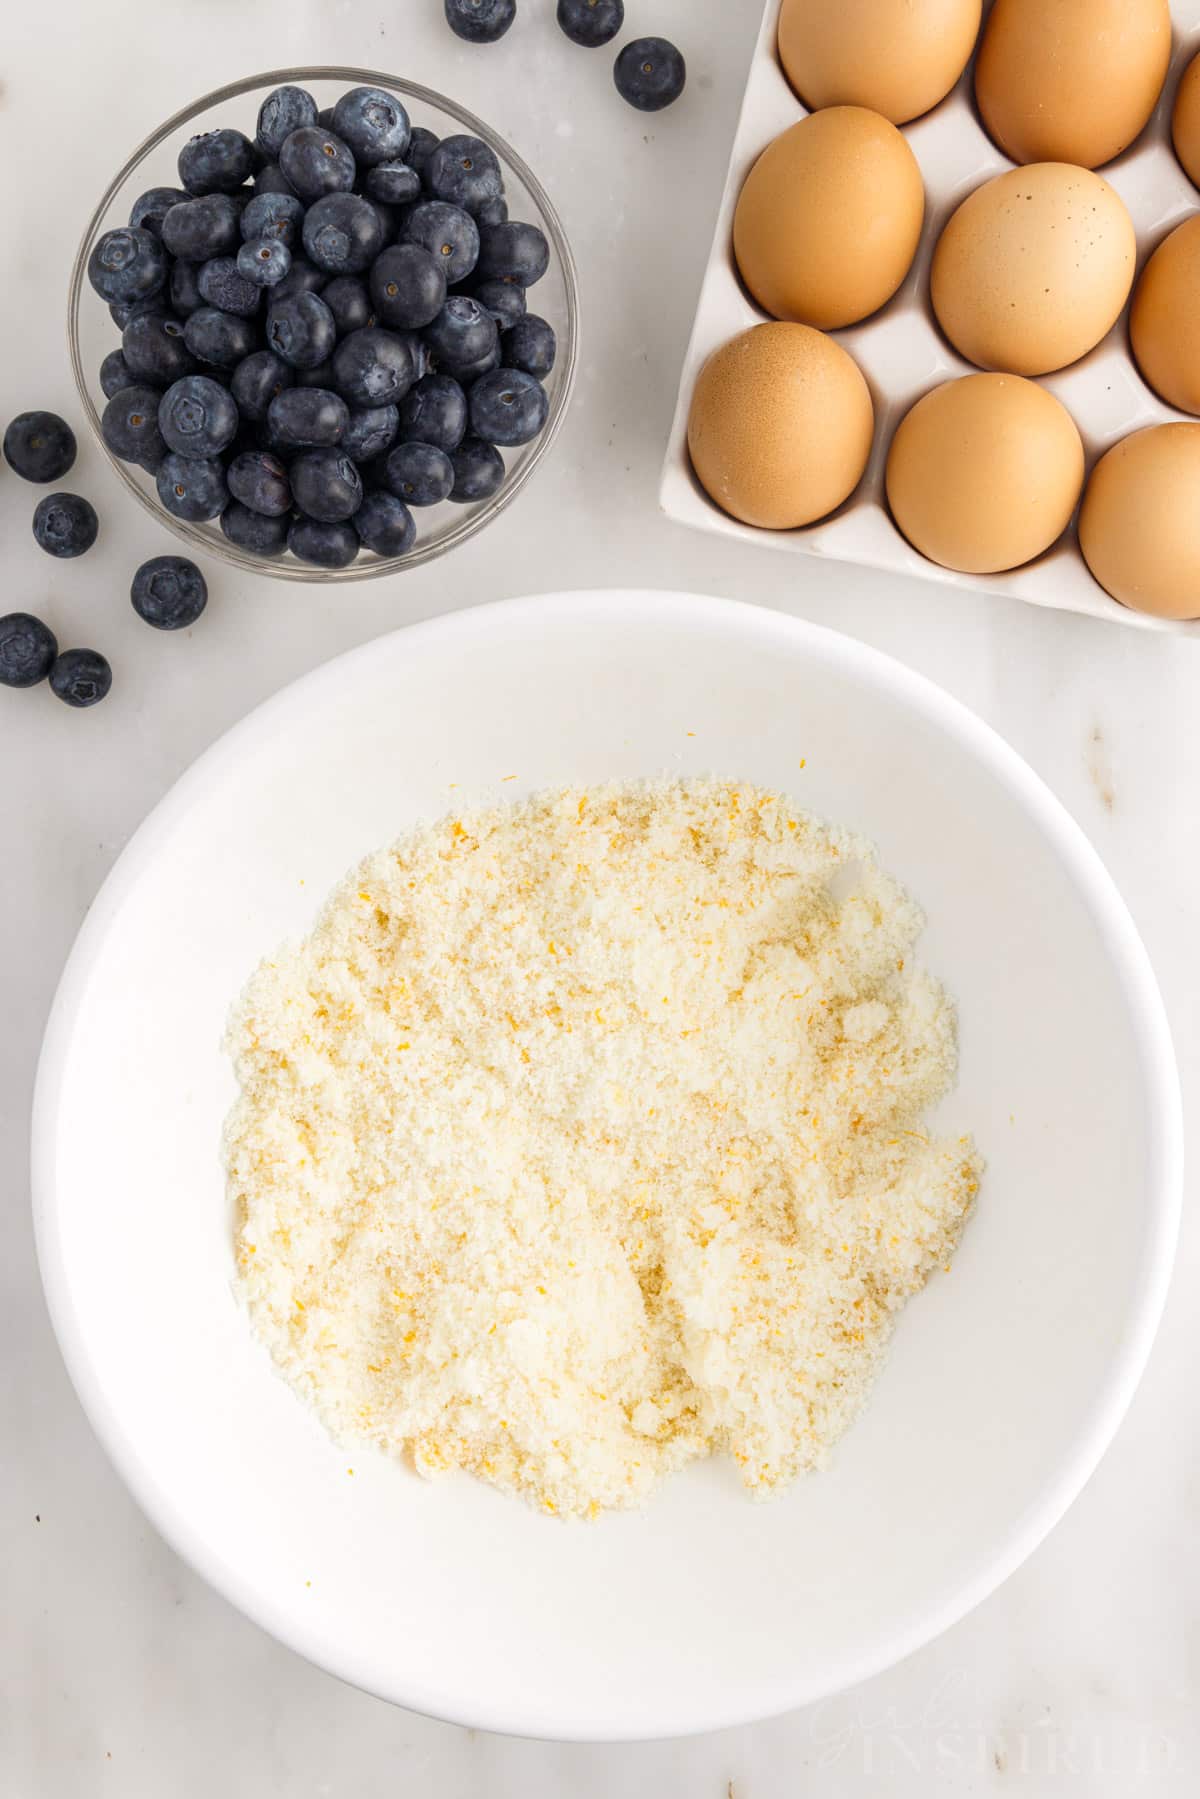 Lemon zest mixed into sugar in a mixing bowl next to eggs and blueberries.